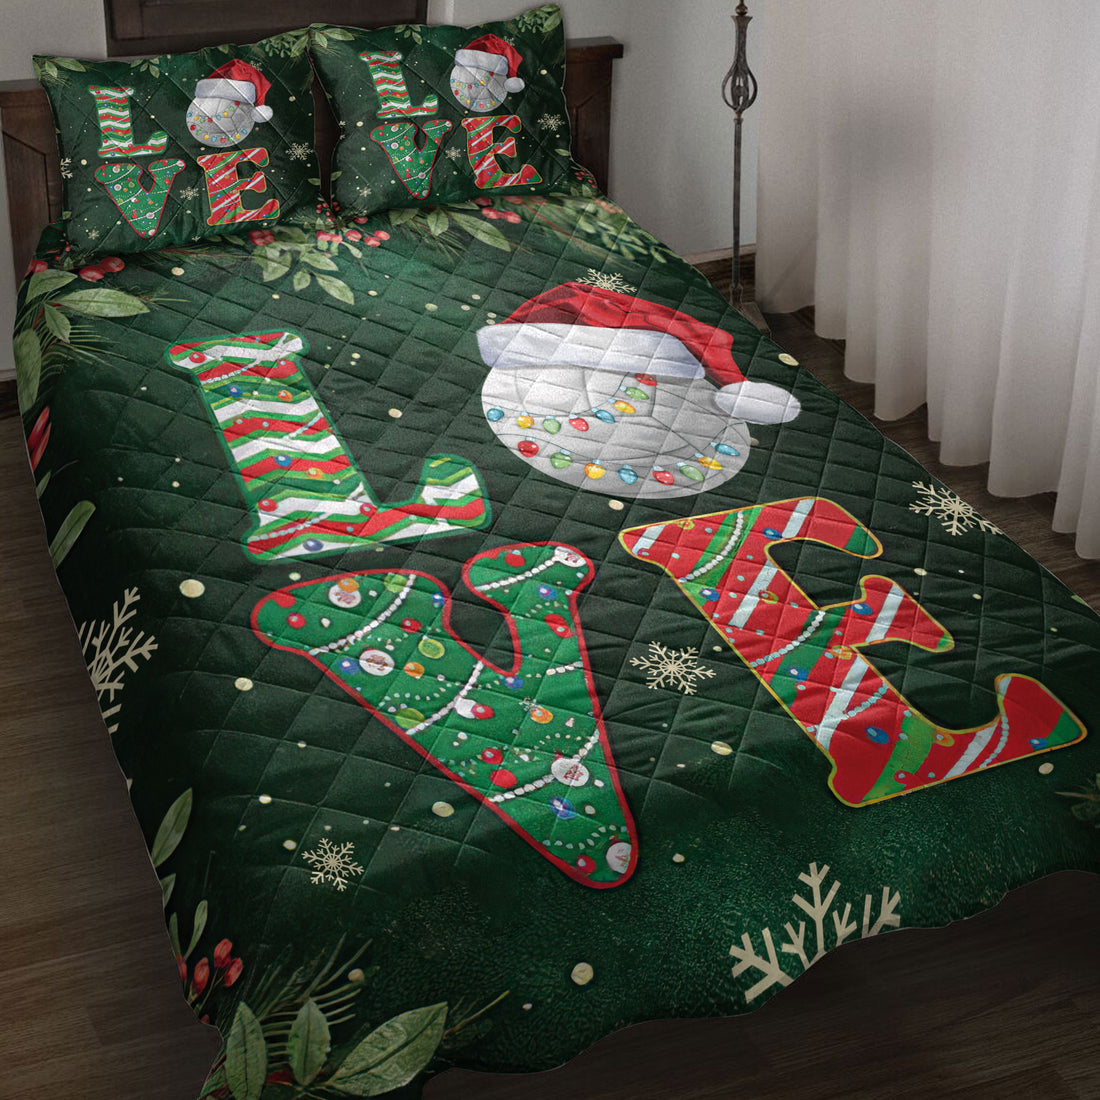 Ohaprints-Quilt-Bed-Set-Pillowcase-Love-Volleyball-With-Christmas-Hat-Holly-Berry--Snowflake-Holiday-Blanket-Bedspread-Bedding-3764-Throw (55'' x 60'')